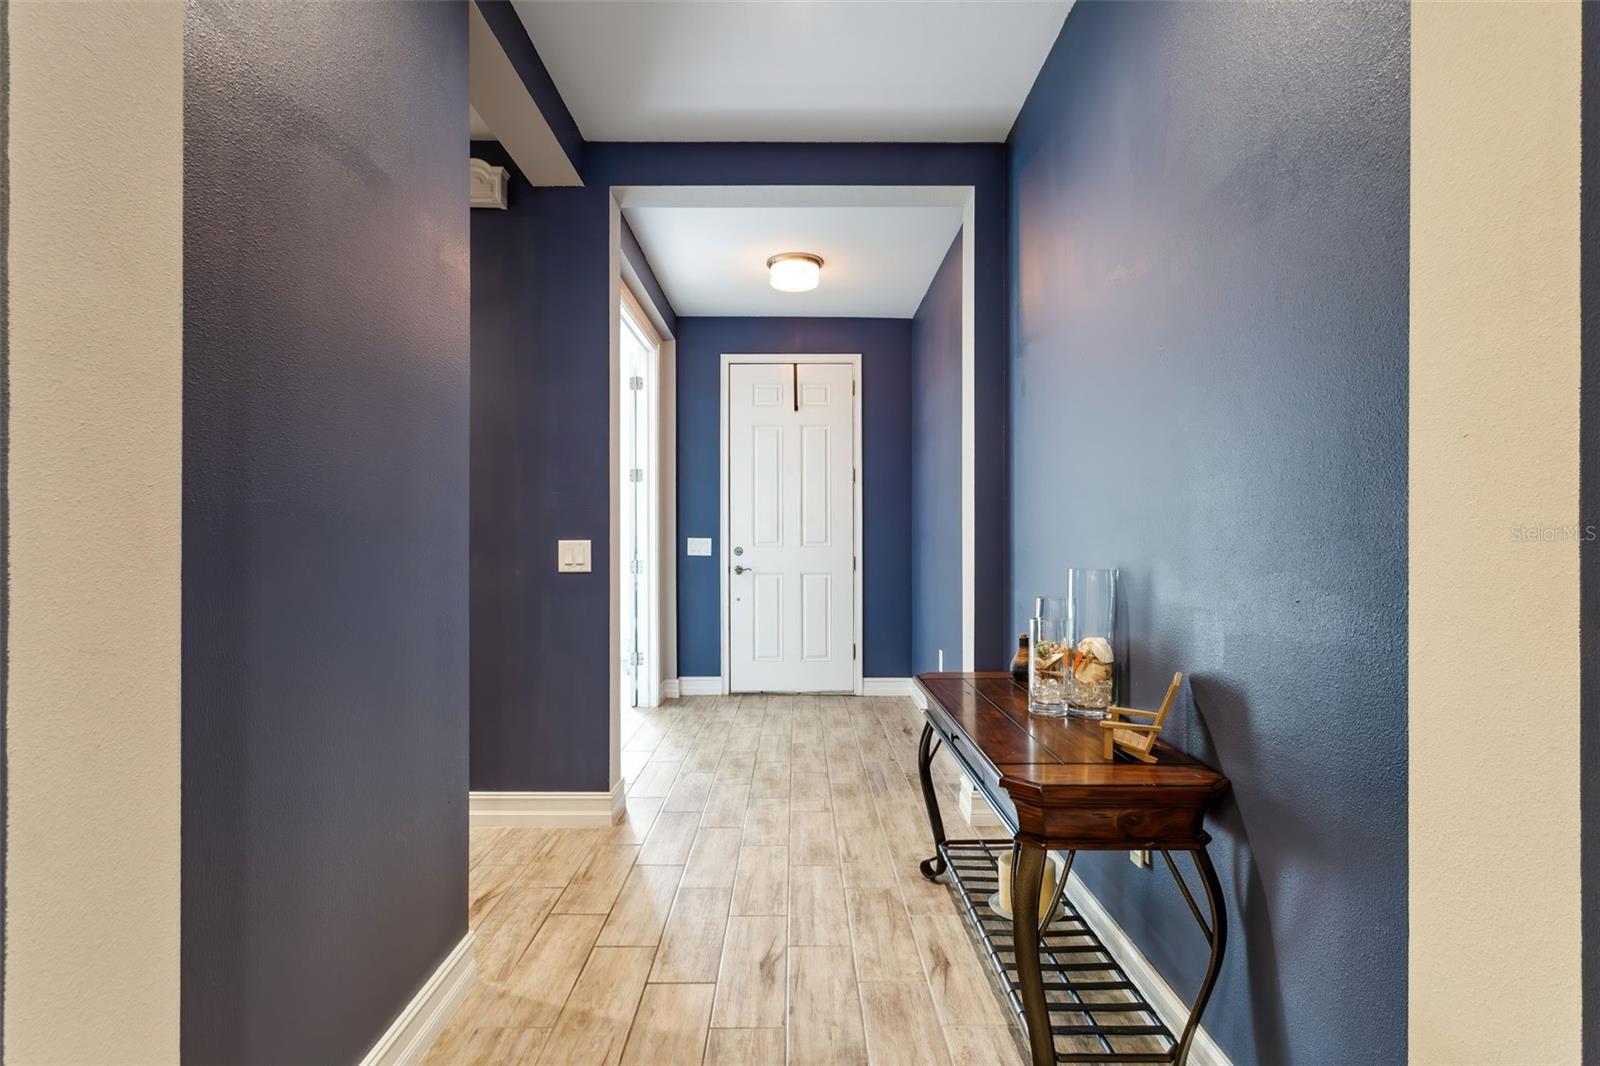 Your entryway leads to a split floorplan with 2 bedrooms up front separate from the Primary.